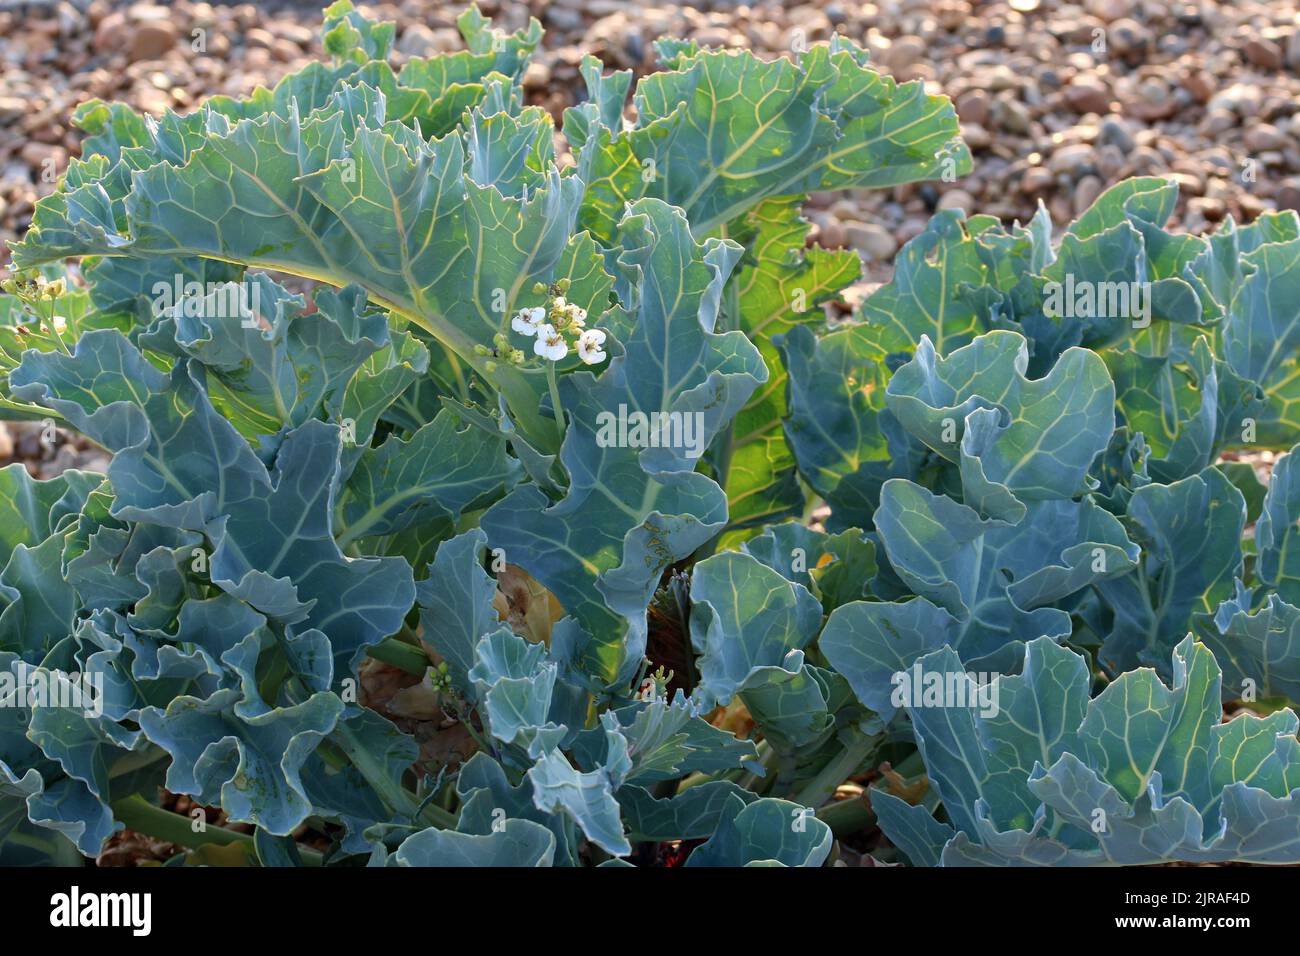 Sea kale, Crambe maritima, with flowers on a shingle beach with a blurred background of pebbles and lit by sunlight from behind. Stock Photo